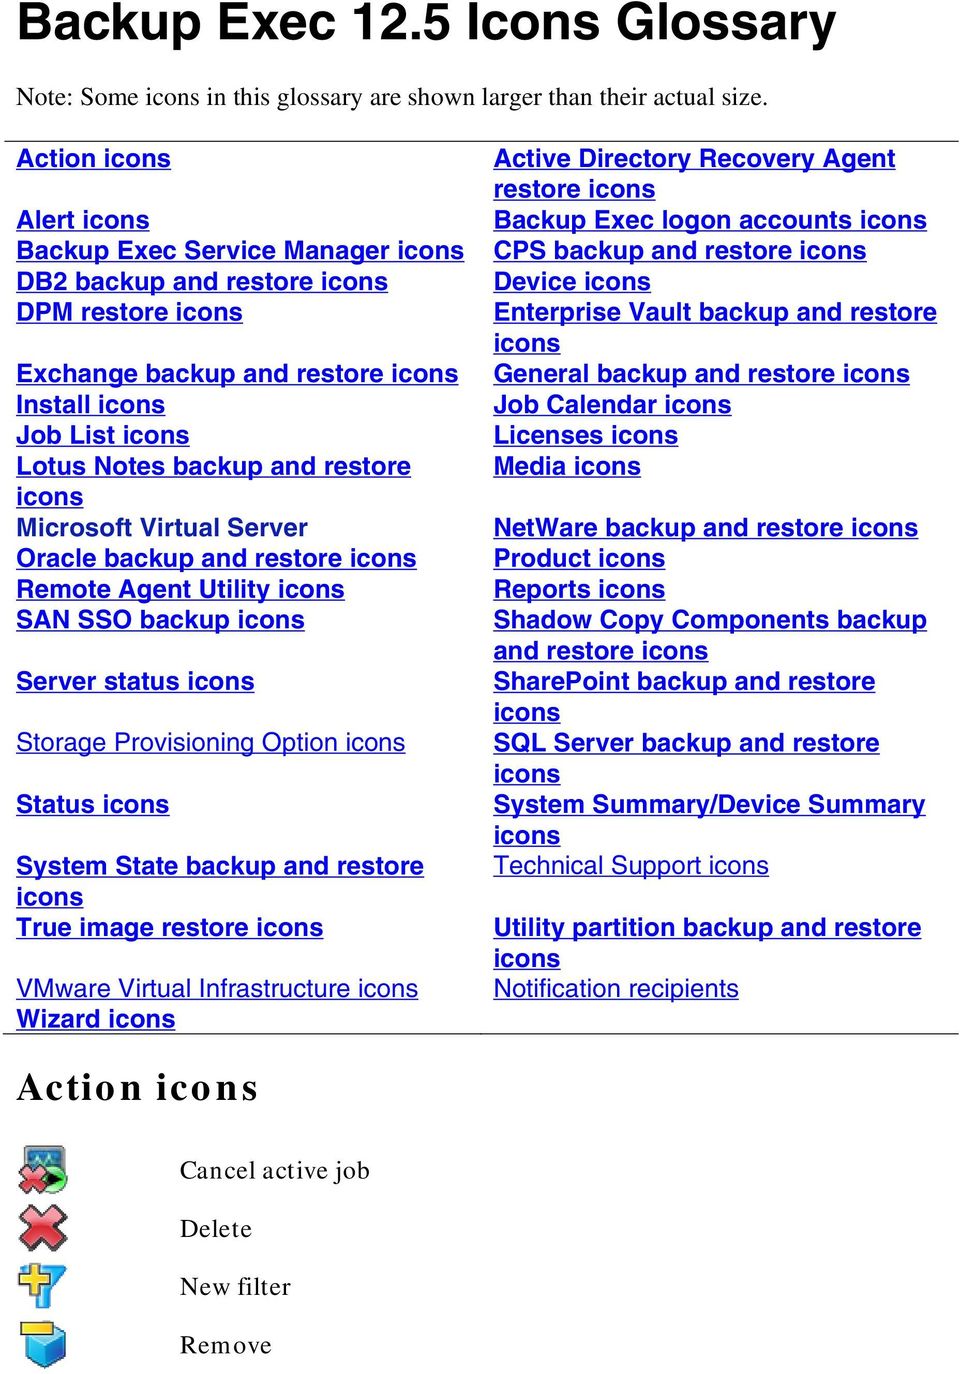 icons Microsoft Virtual Server Oracle backup and restore icons Remote Agent Utility icons SAN SSO backup icons Server status icons Storage Provisioning Option icons Status icons System State backup